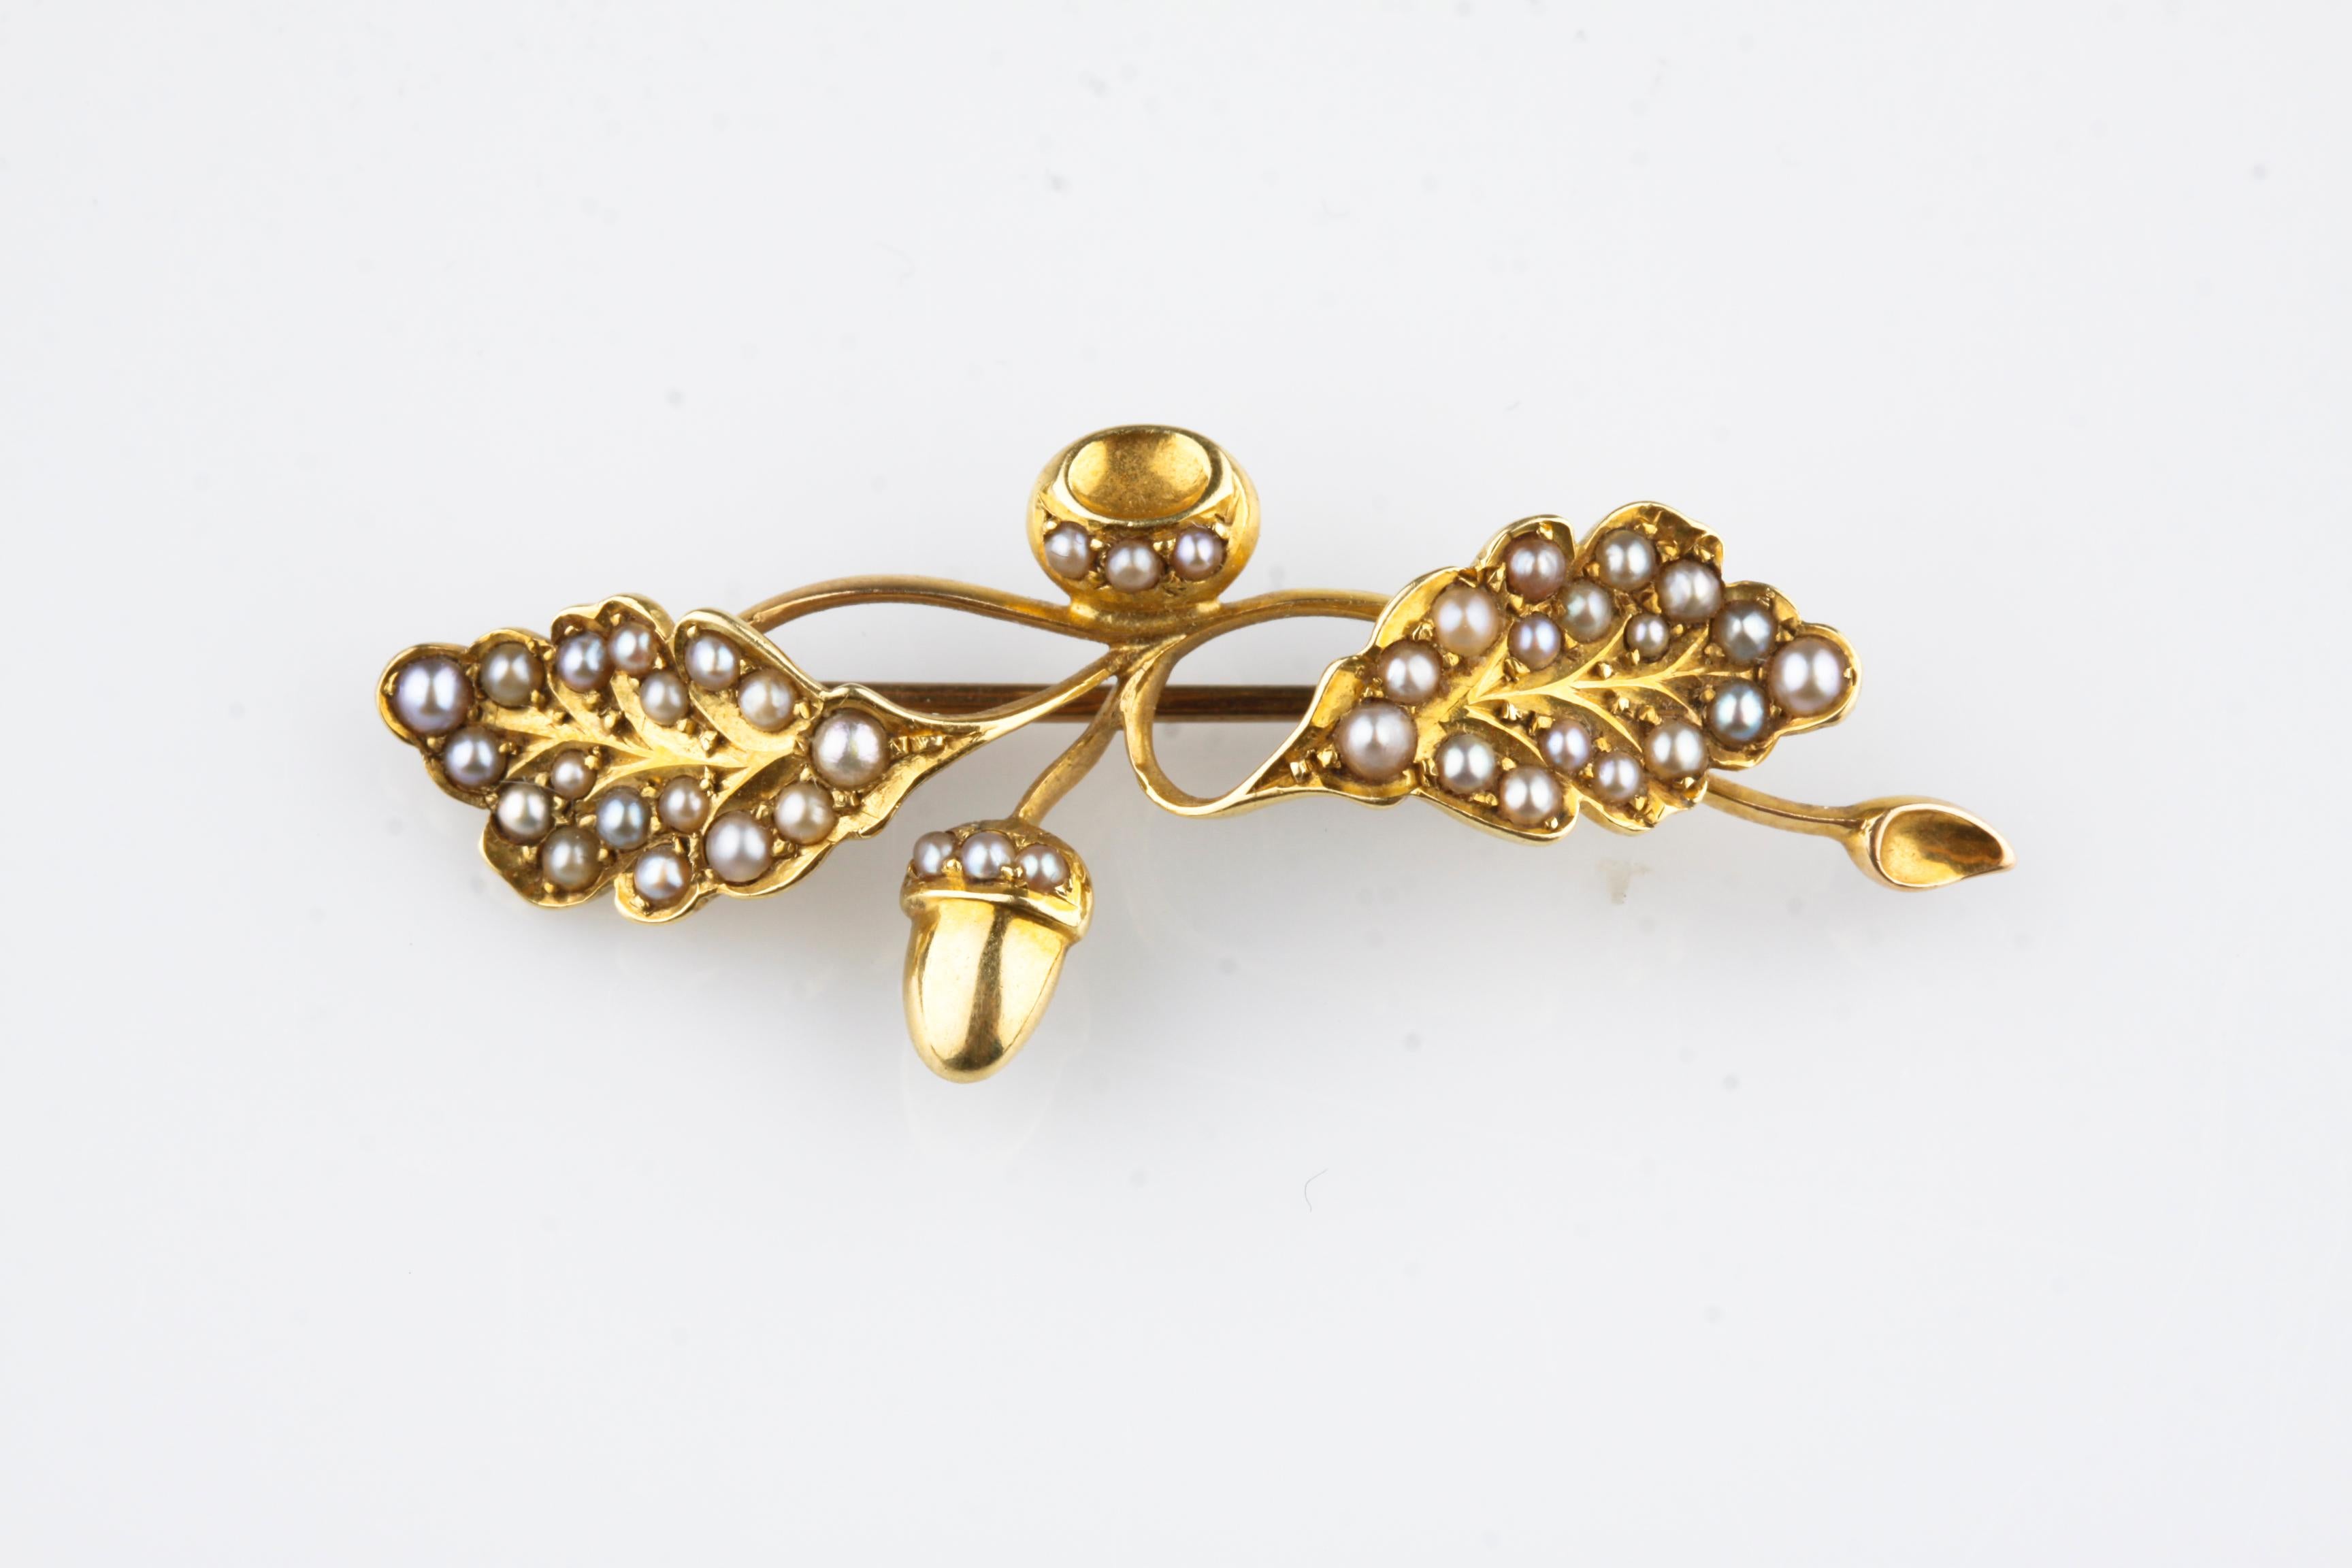 Gorgeous Seed Pearl Brooch
Imitates Oak Leaves and Acorns
Length of Brooch = 19 mm
Width of Brooch = 39 mm
Total Mass = 4.4 grams
Piece is in Good Condition. Shows Few Signs of Aging or Wear.
Gorgeous Piece!